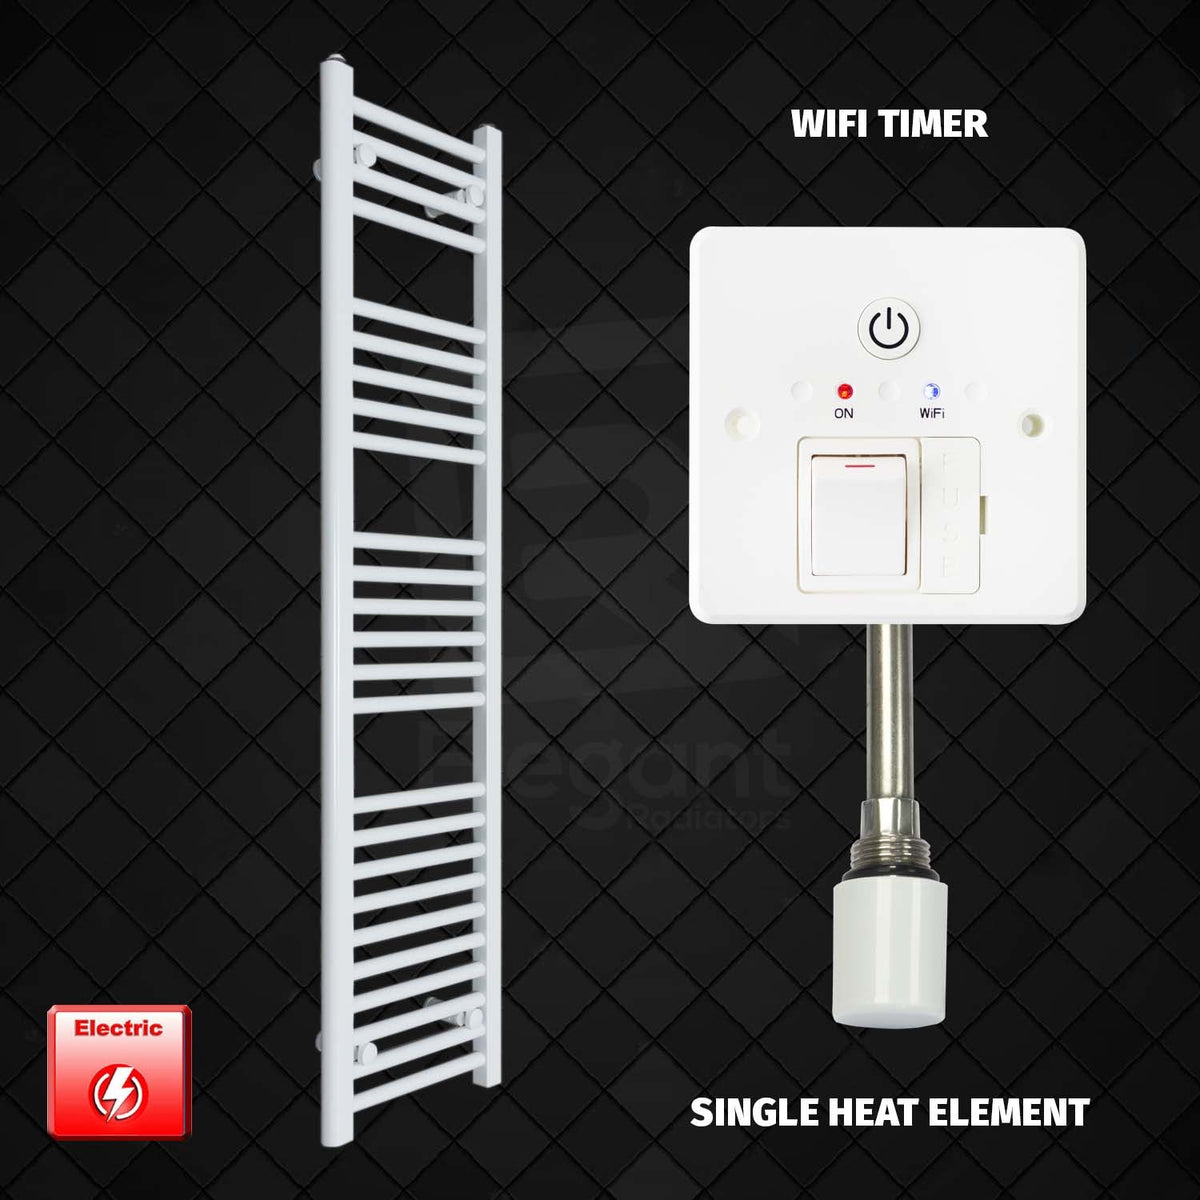 1400 x 300 Pre-Filled Electric Heated Towel Radiator White HTR Wifi Timer Single Heat Element